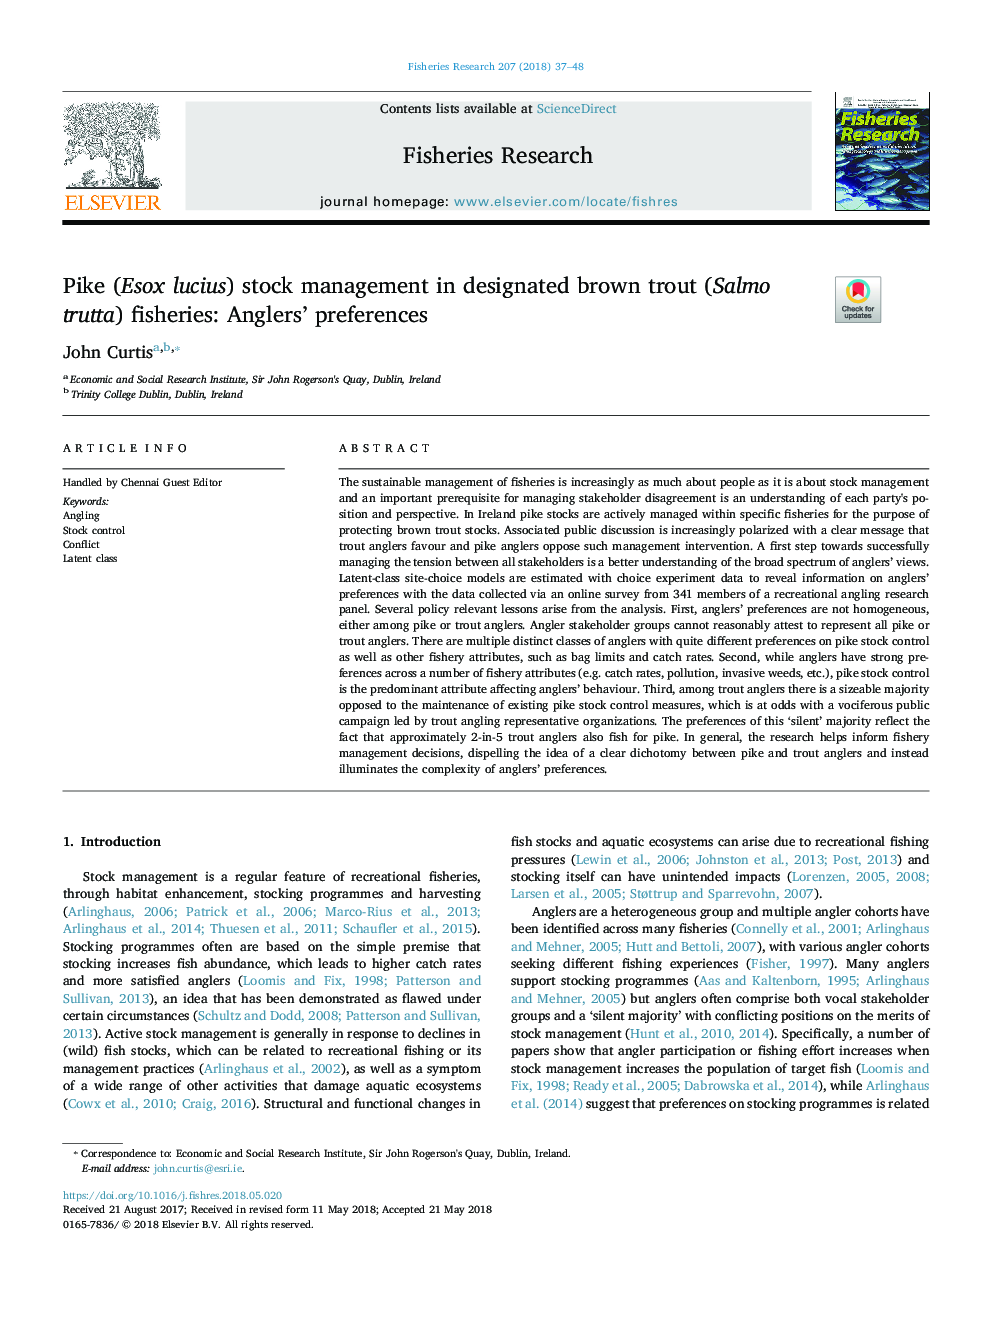 Pike (Esox lucius) stock management in designated brown trout (Salmo trutta) fisheries: Anglers' preferences